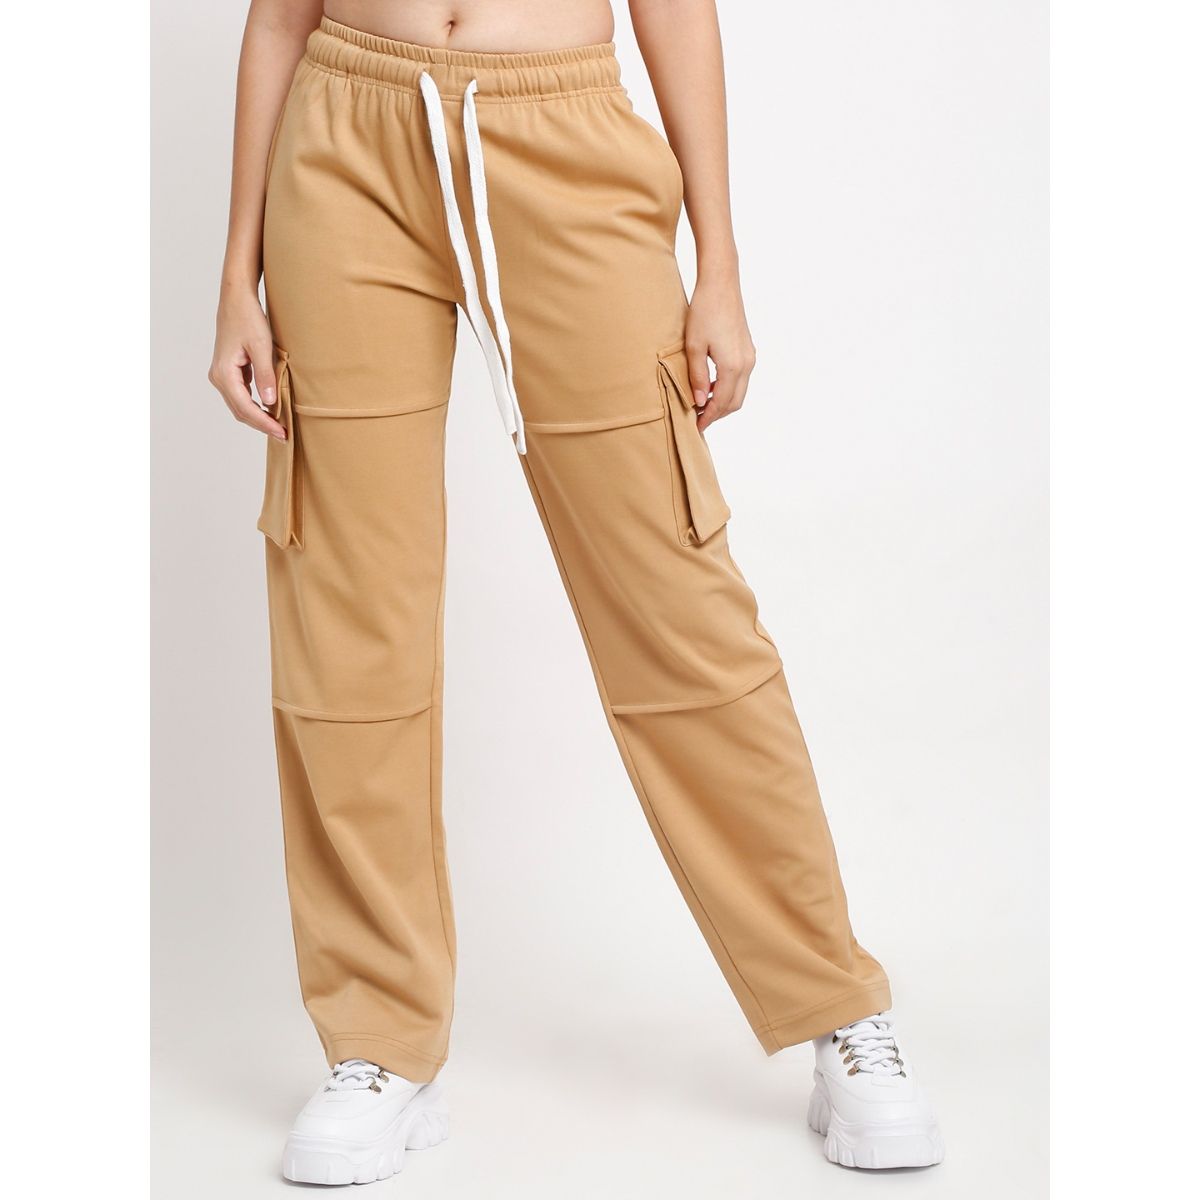 Buy Men Cargo Straight Pants Online at Best Prices in India - JioMart.